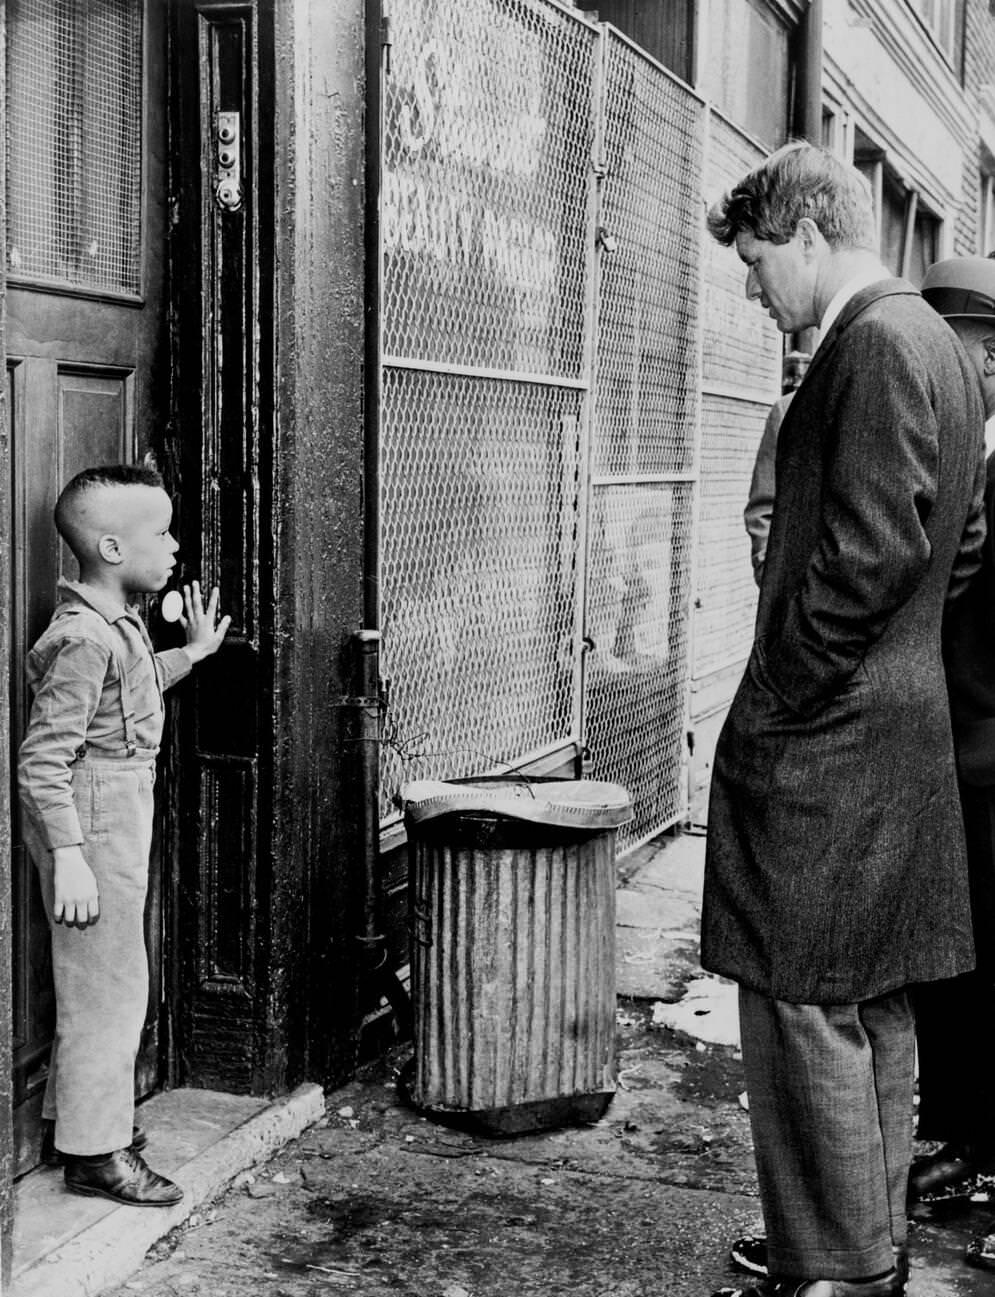 Senator Robert Kennedy Discusses School With Ricky Taggart In Brooklyn, 1966.